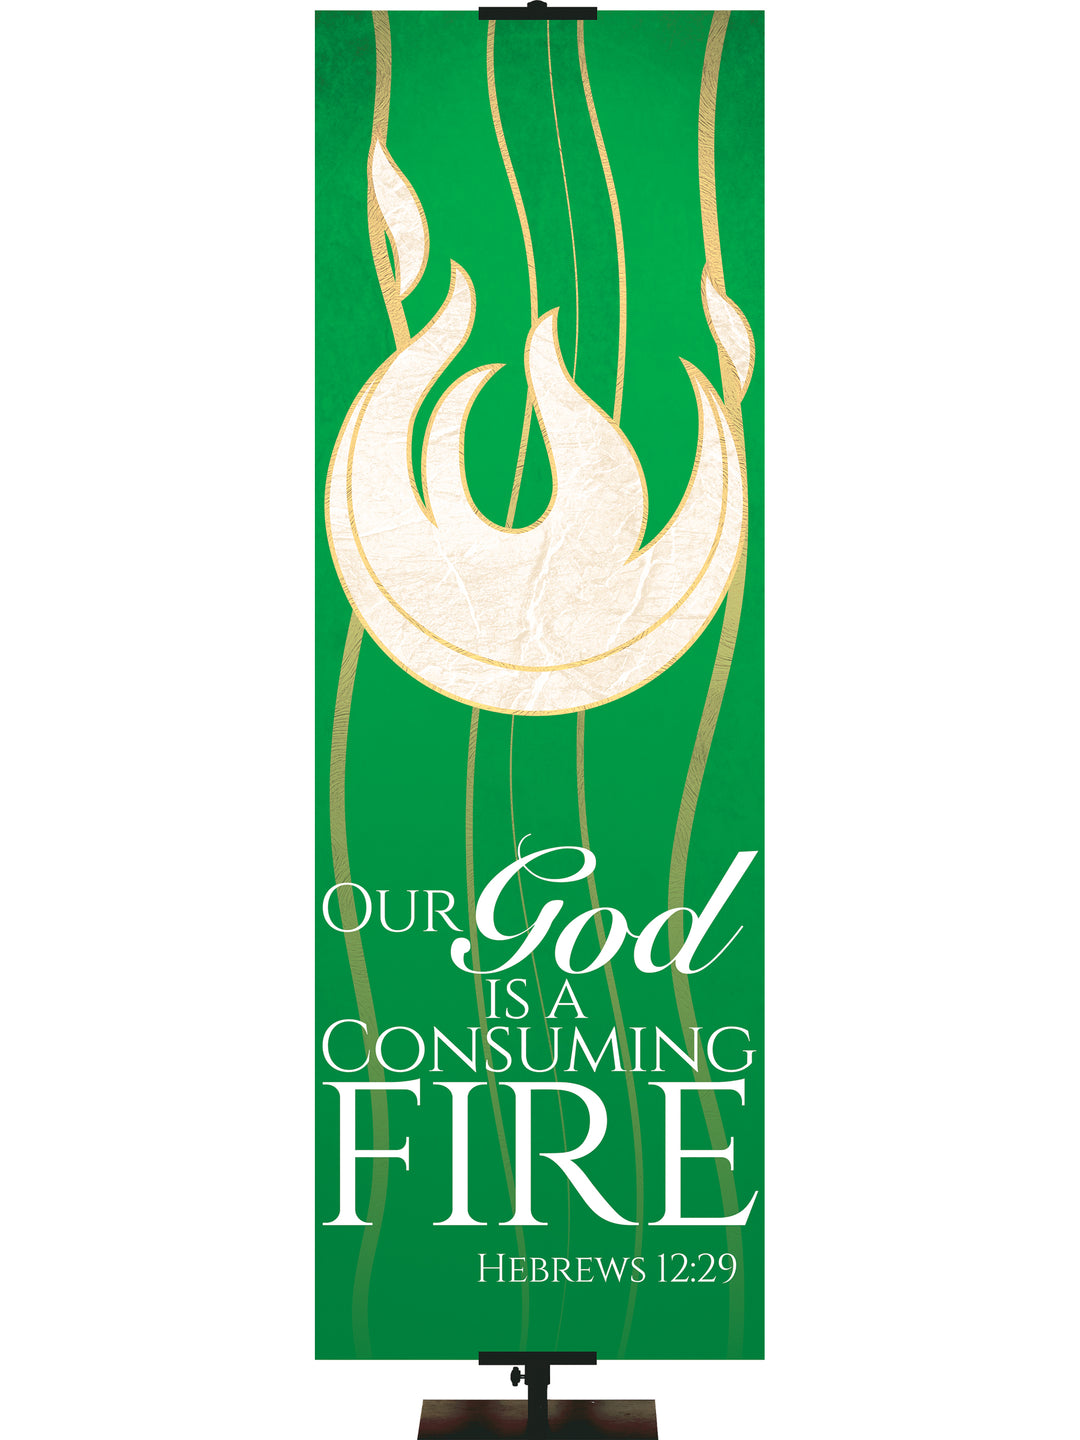 Experiencing God Symbols and Phrases Flame, Our God Is A Consuming Fire - Liturgical Banners - PraiseBanners